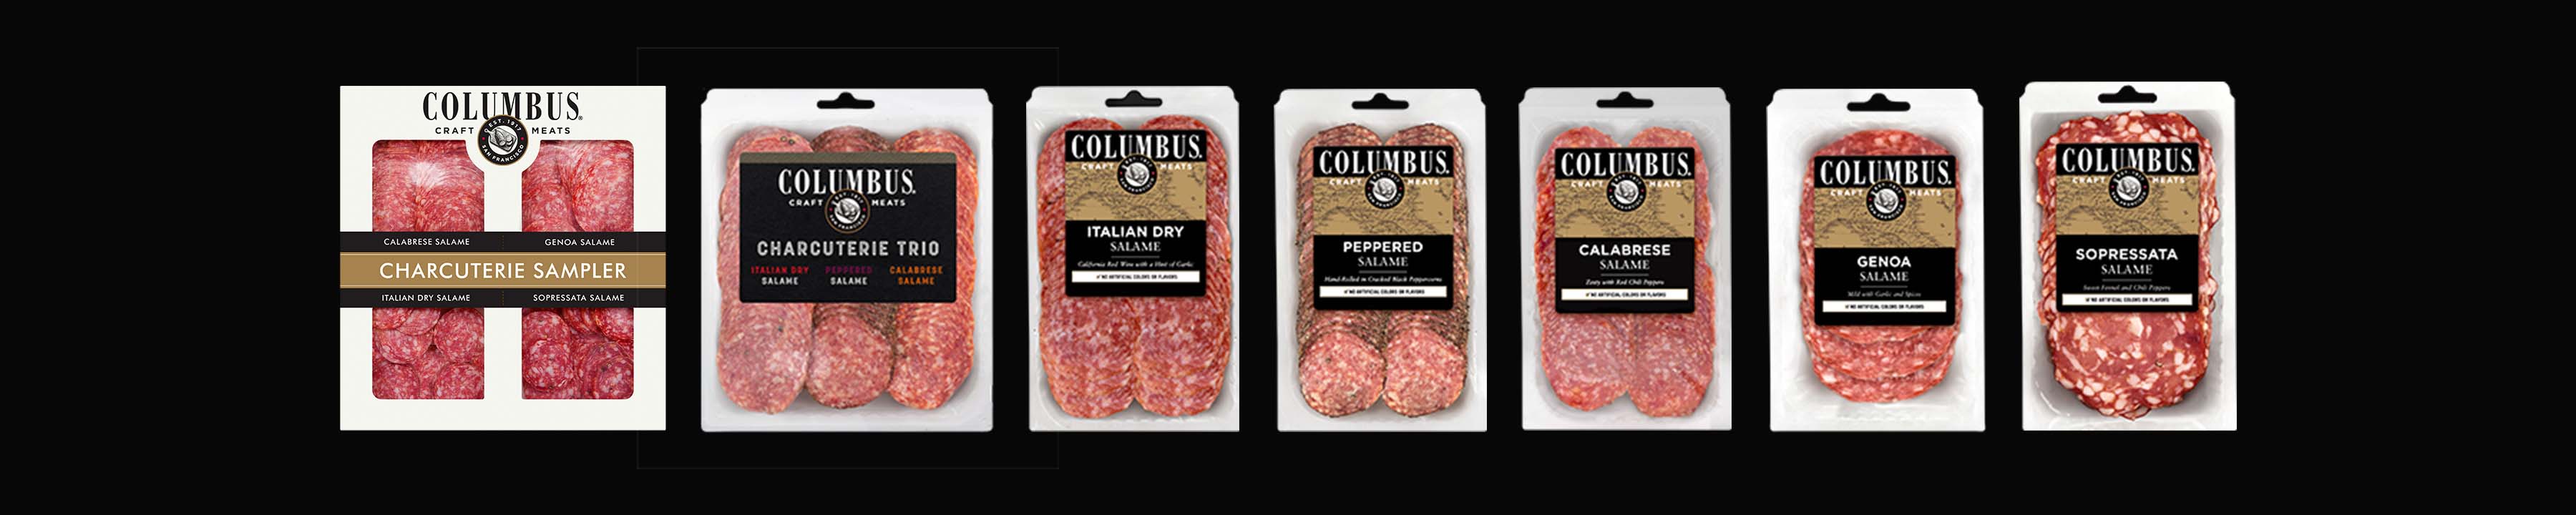 columbus sliced packages lineup of 7 packages